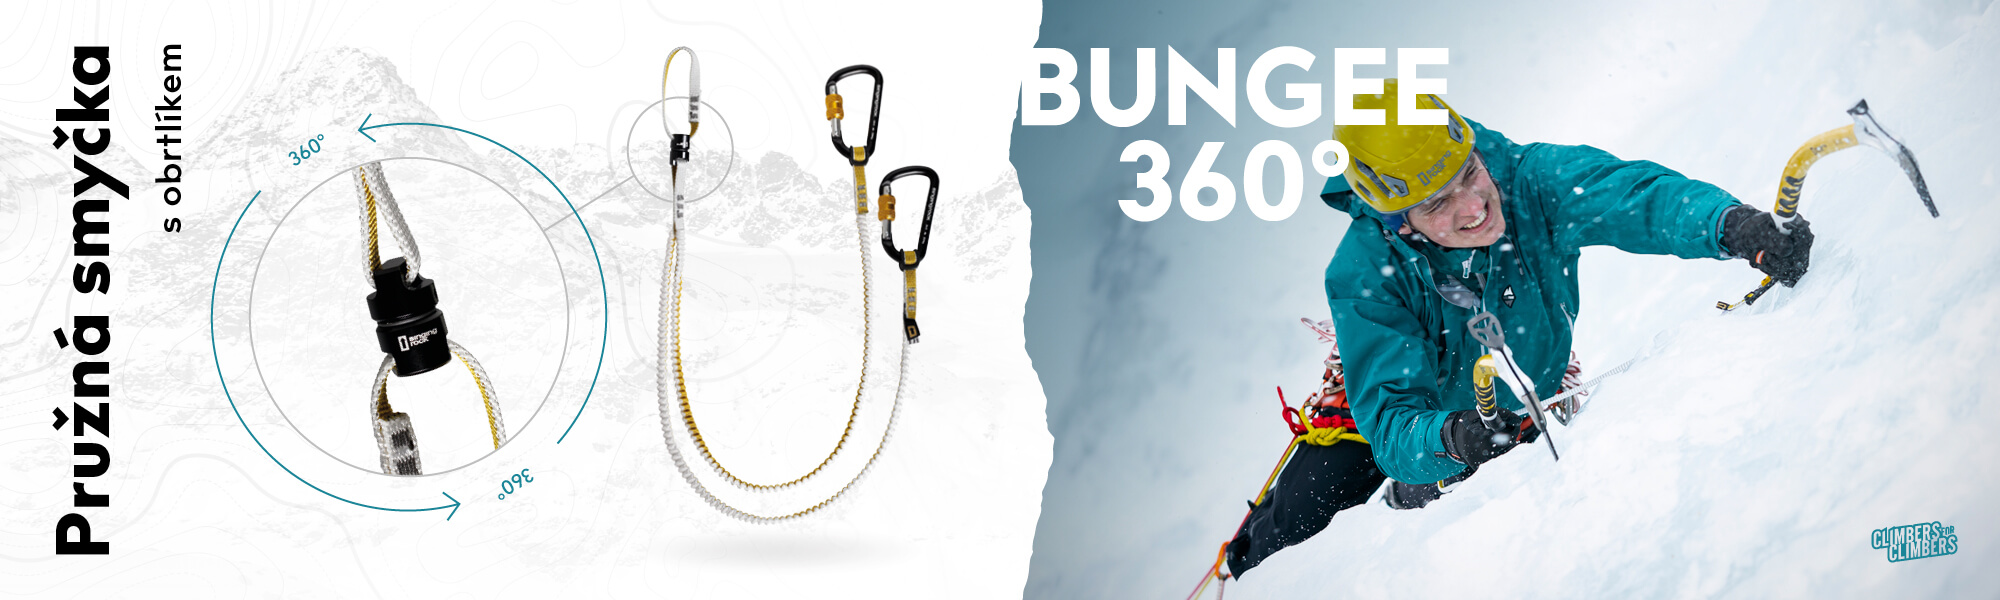 BUNGEE 360°